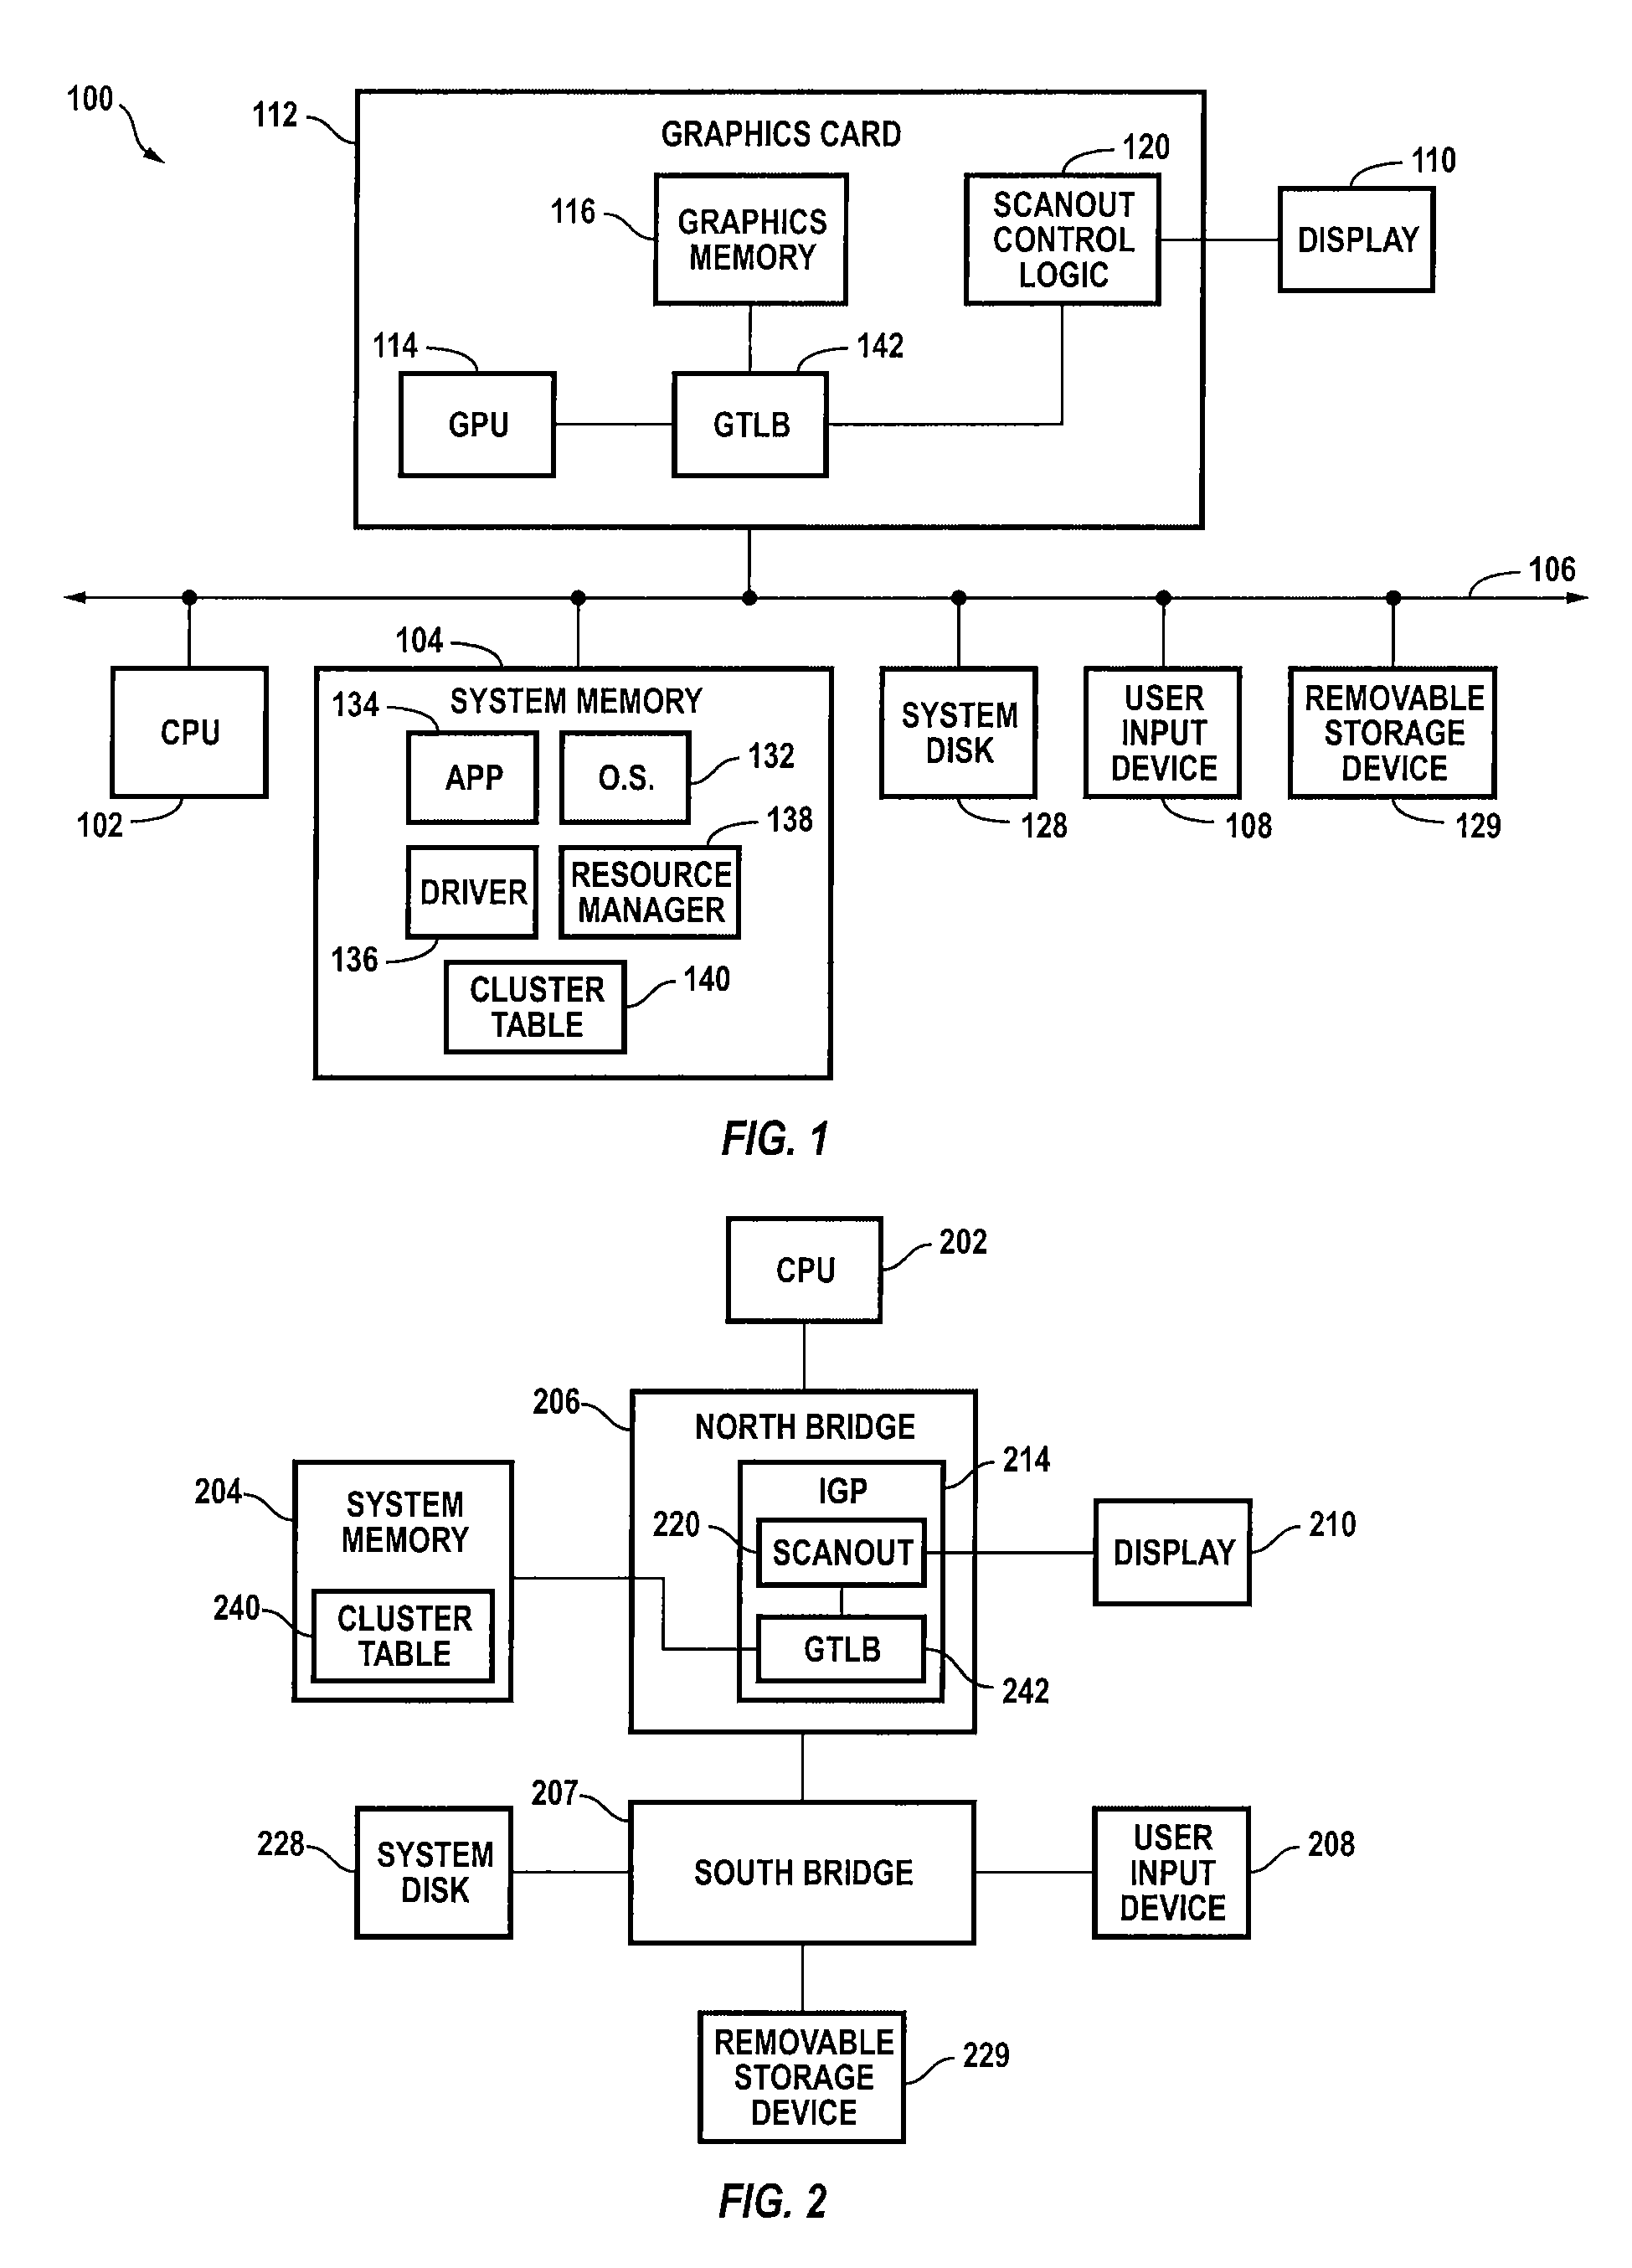 Virtual address translation system with caching of variable-range translation clusters